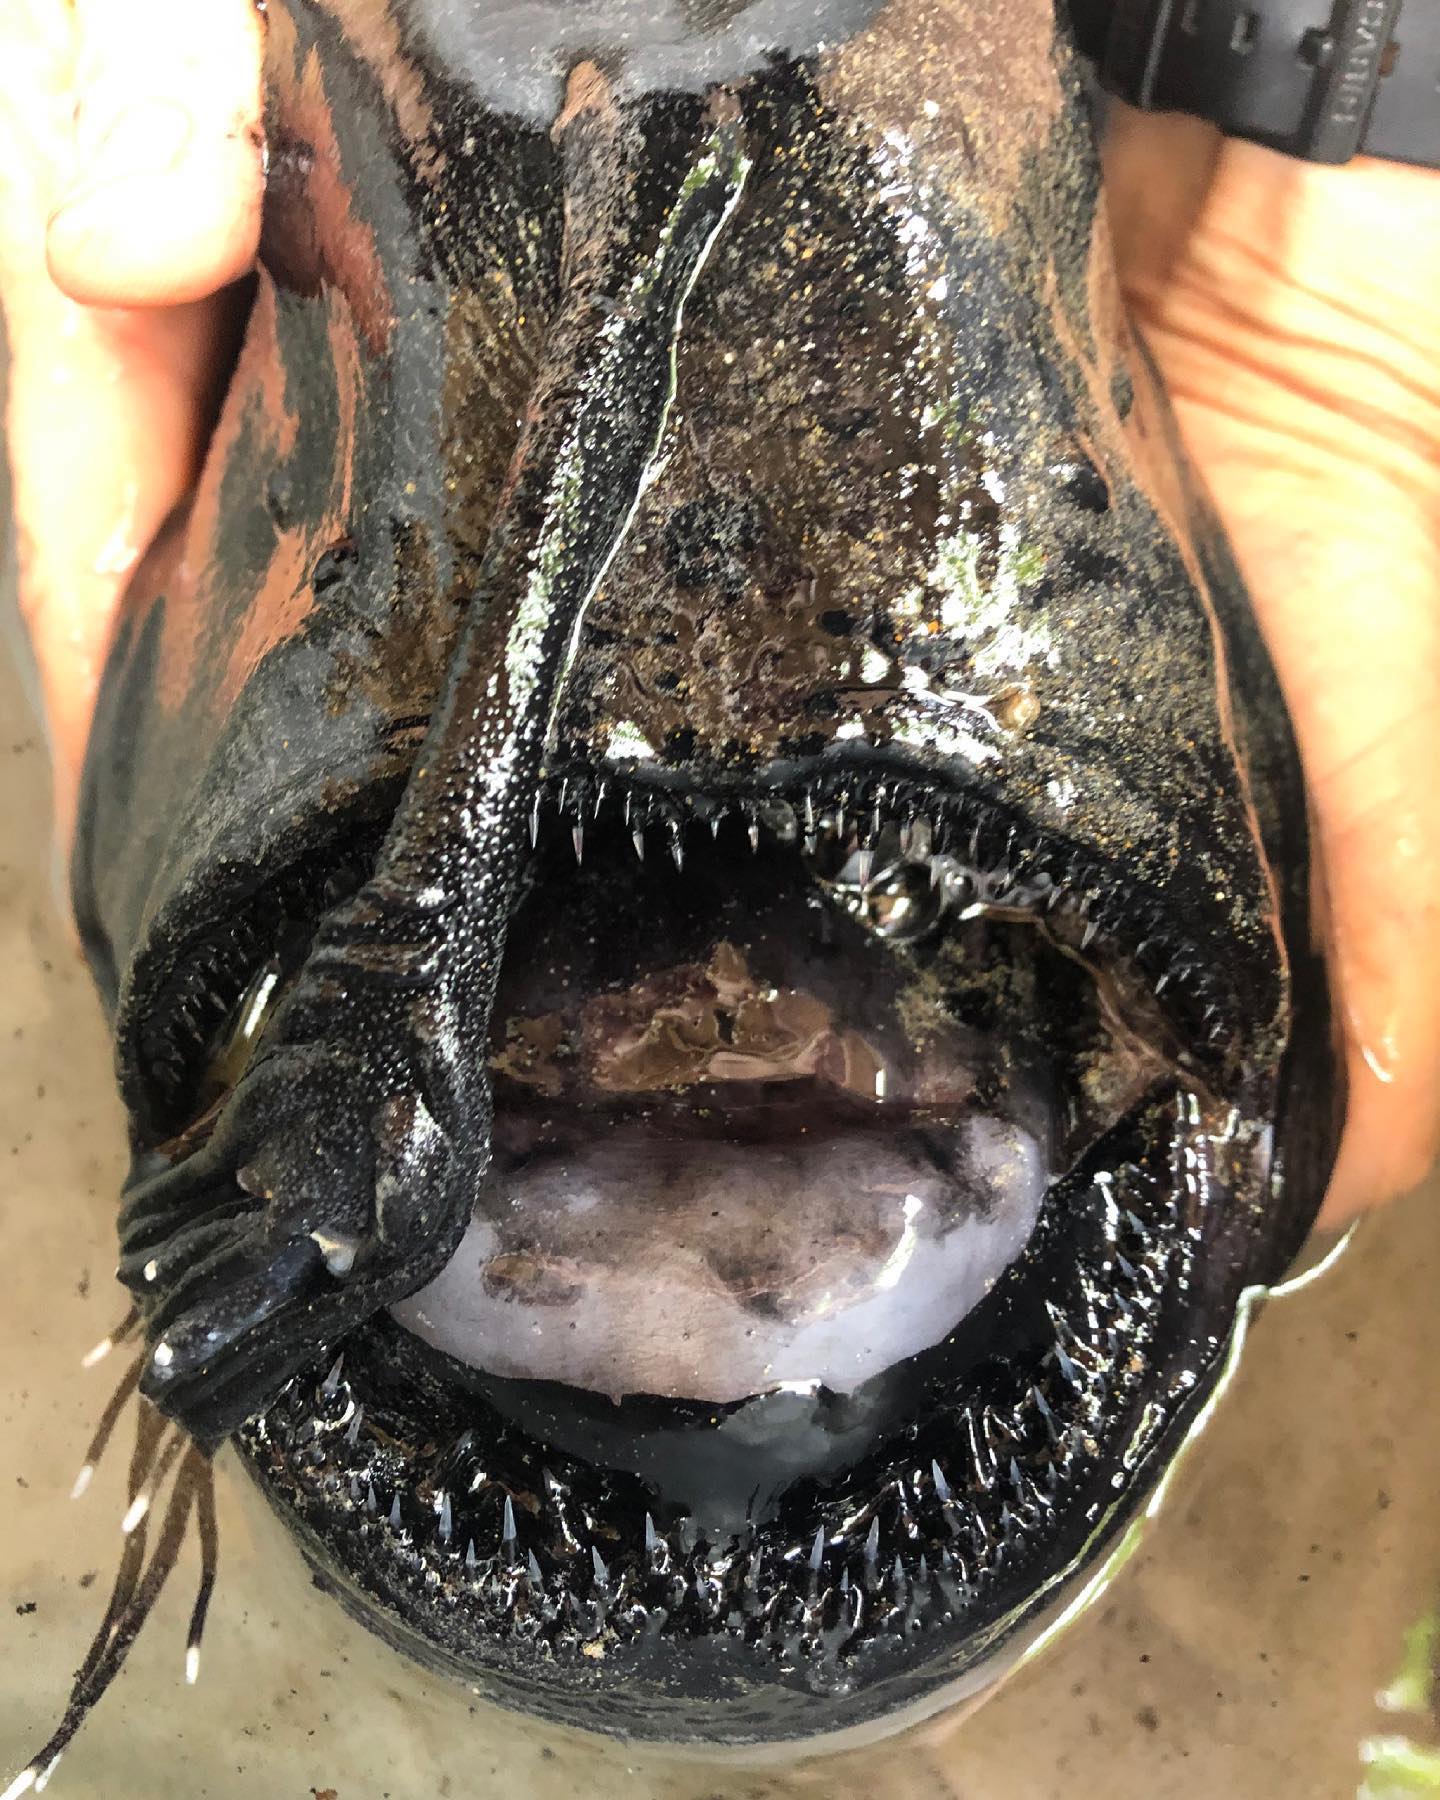 The Pacific footballfish is a member of the anglerfish family.